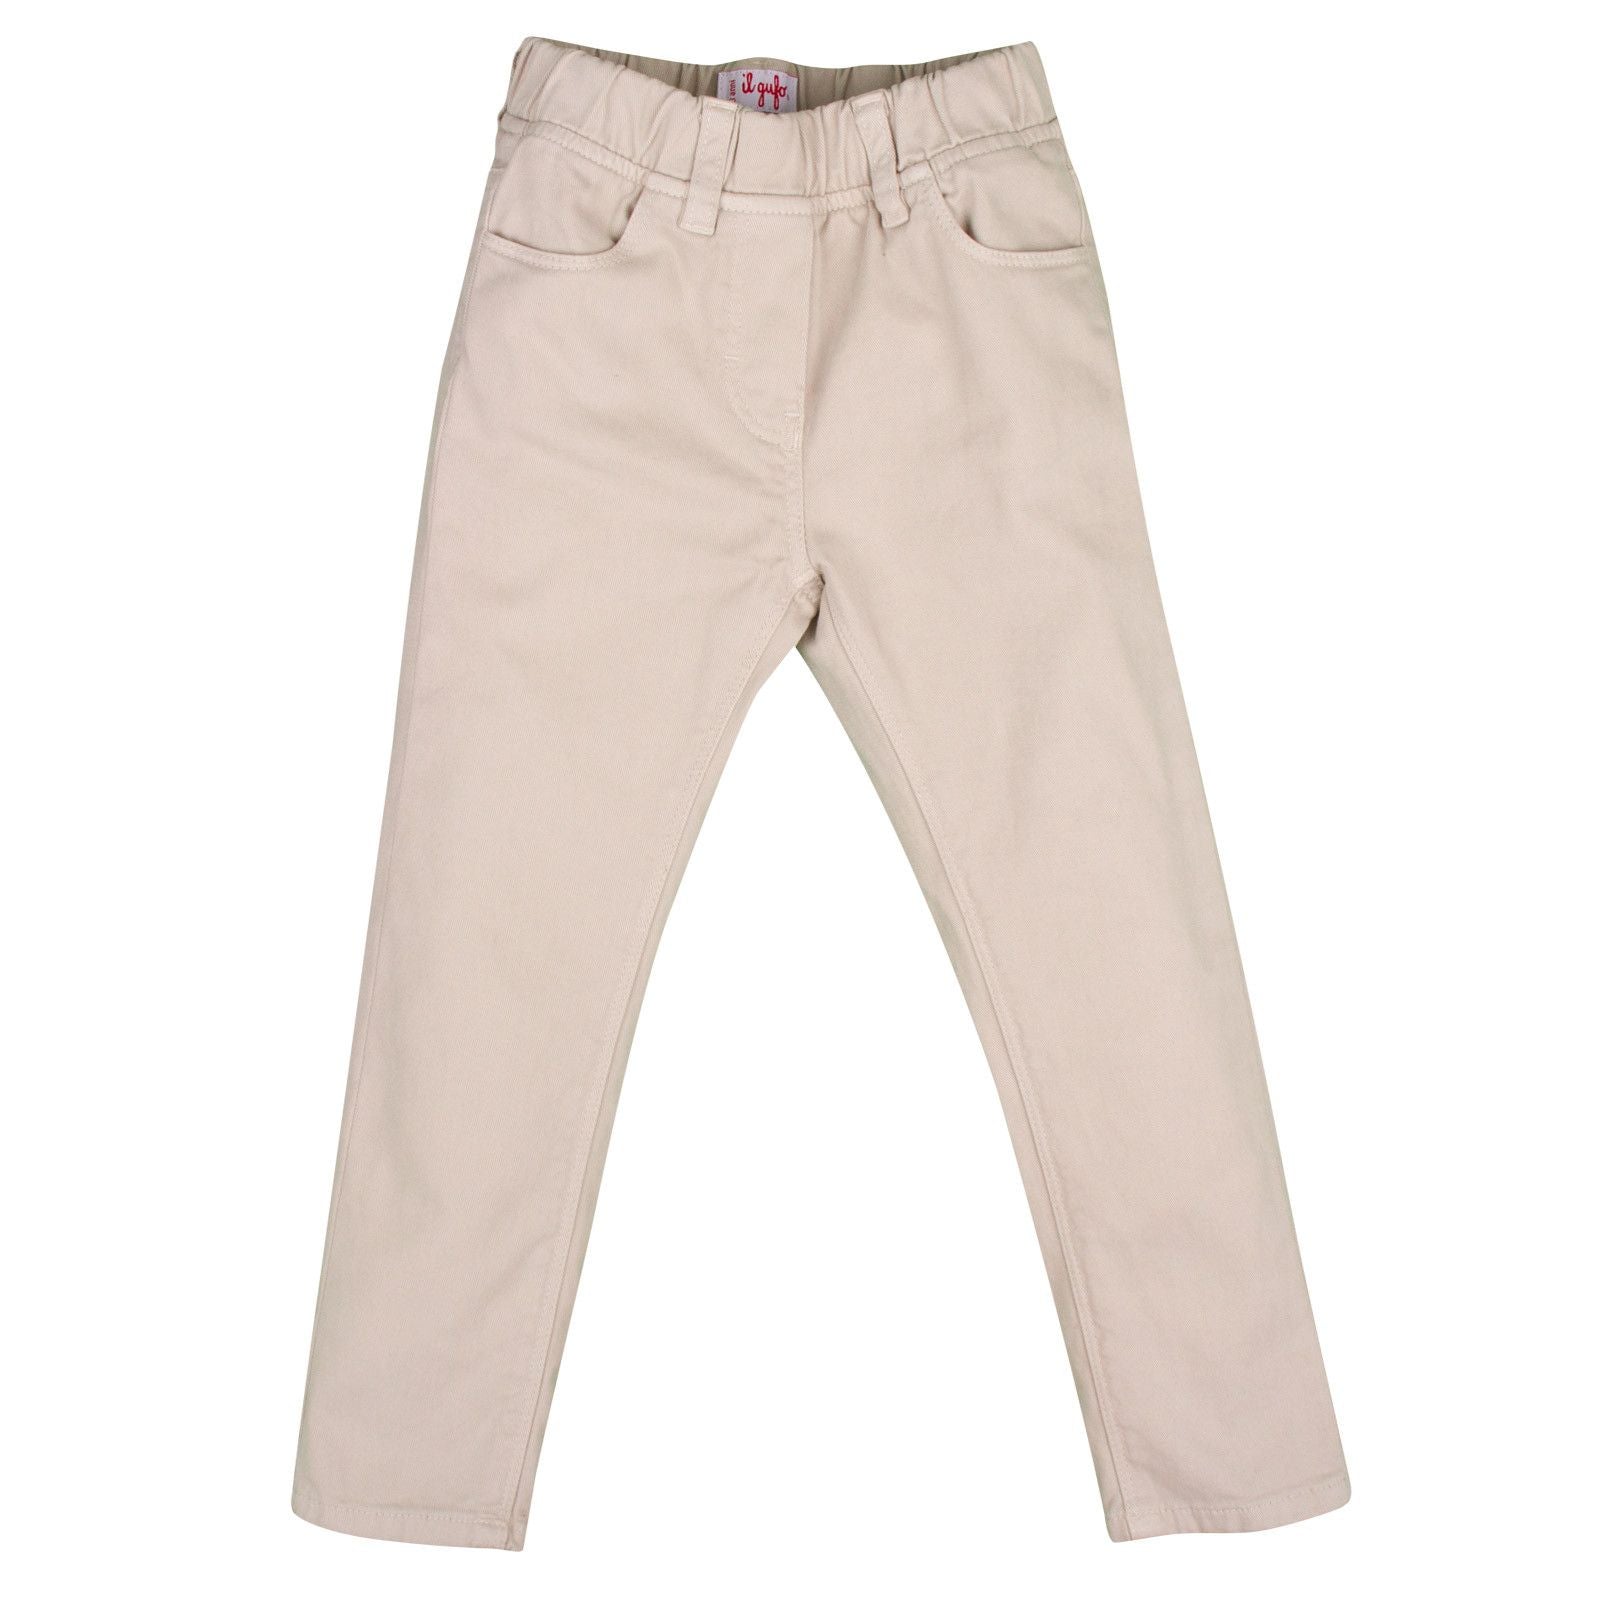 Girls Beige Ribbed Cotton Trousers - CÉMAROSE | Children's Fashion Store - 1